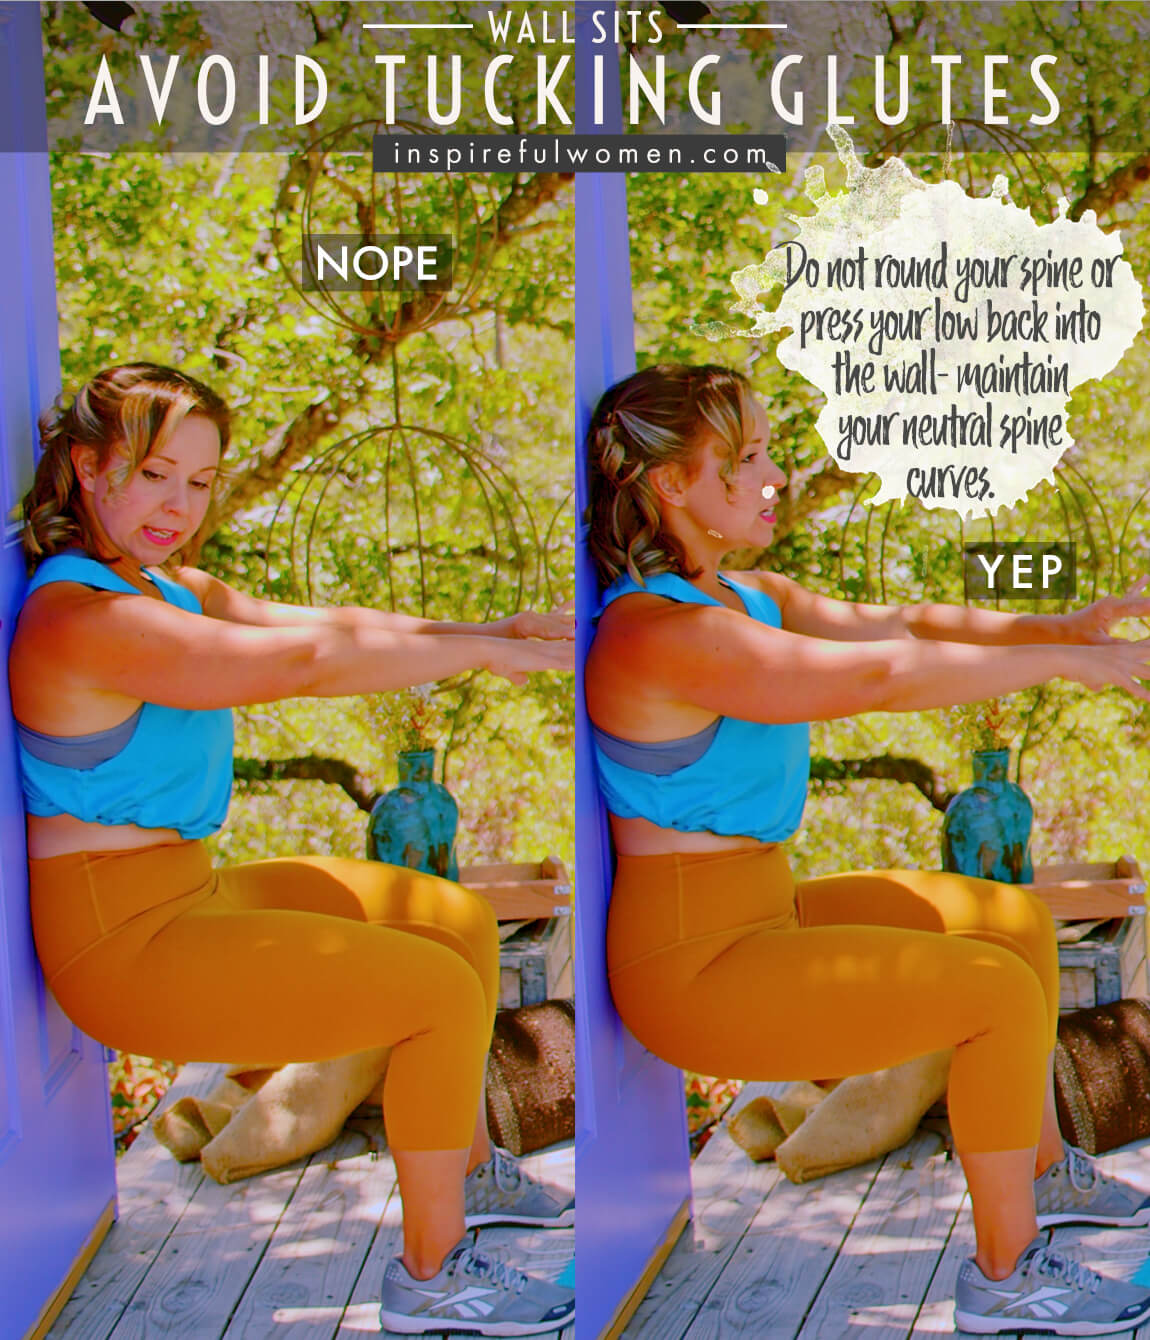 avoid-tucking-glutes-pressing-back-into-wall-isometric-wall-sit-squat-common-mistakes